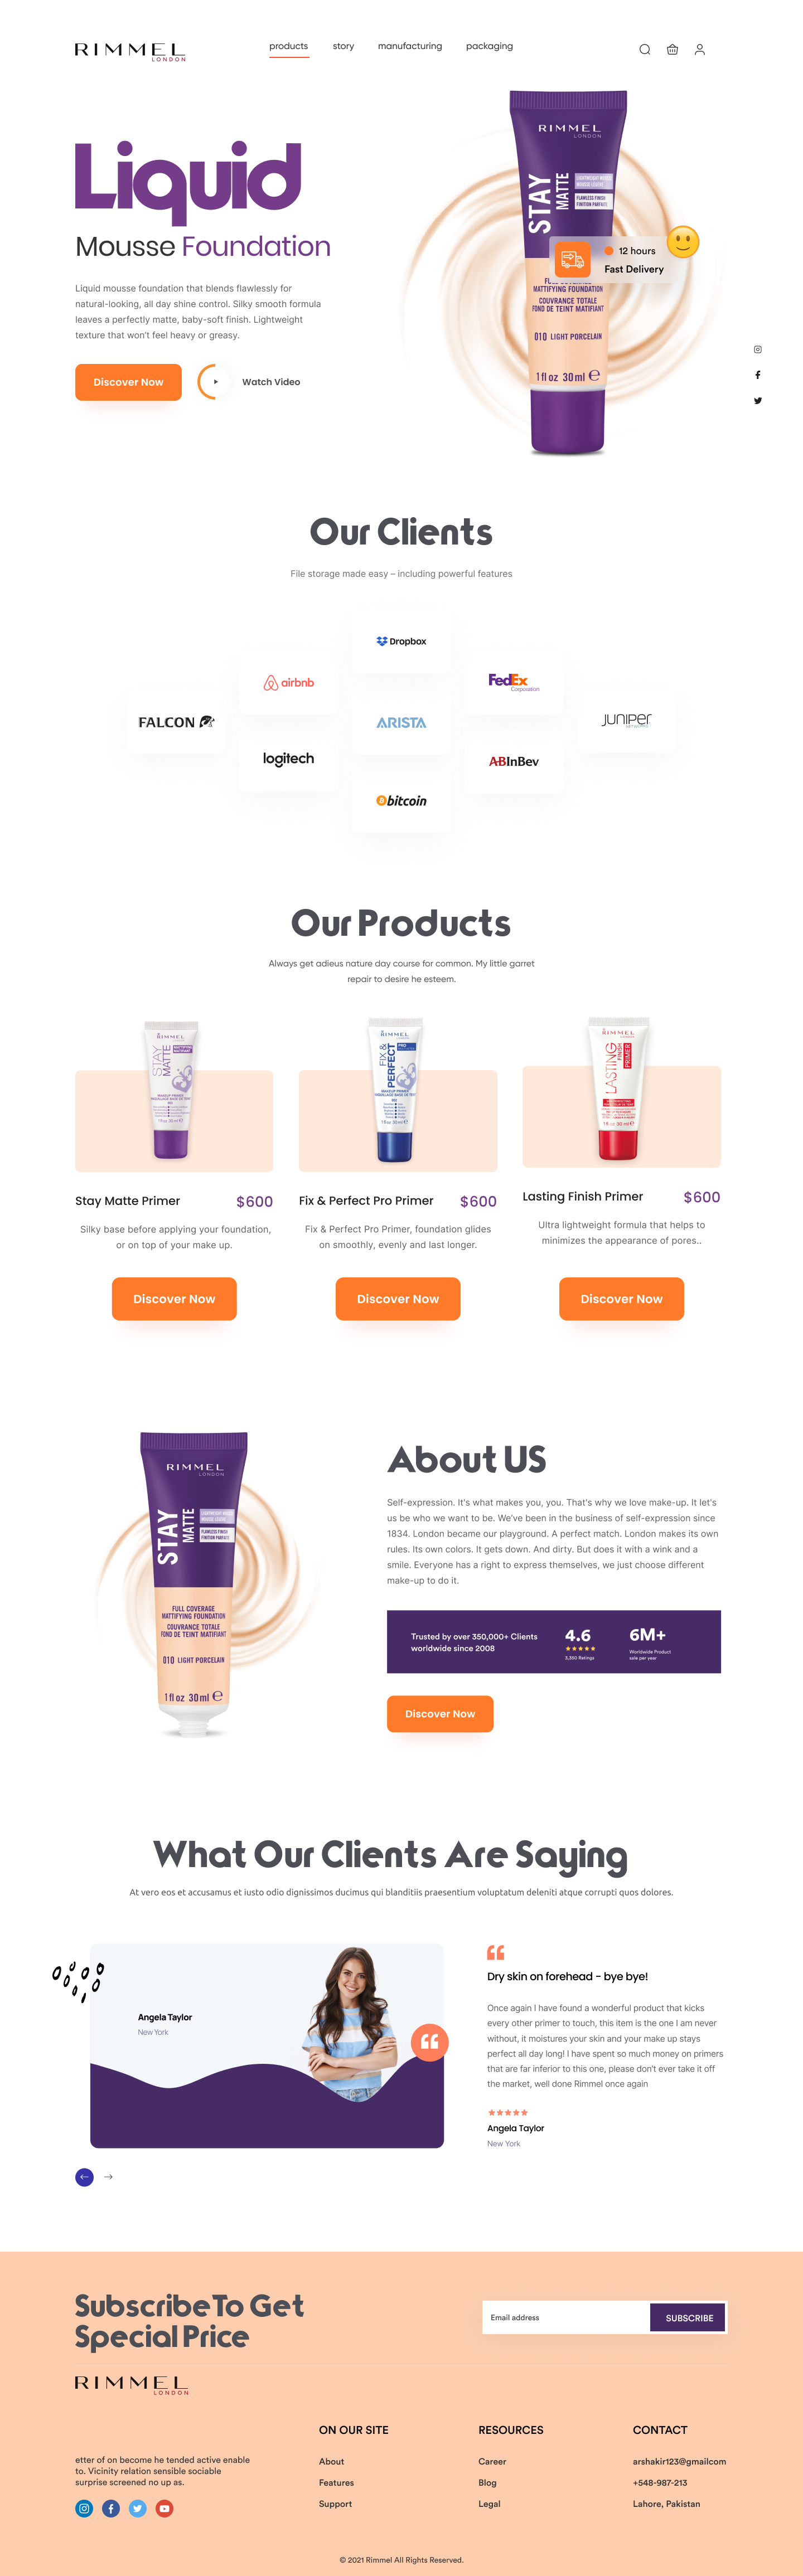 Full Preview of RIMMEL - Shopify Store Design for Cosmetics Products